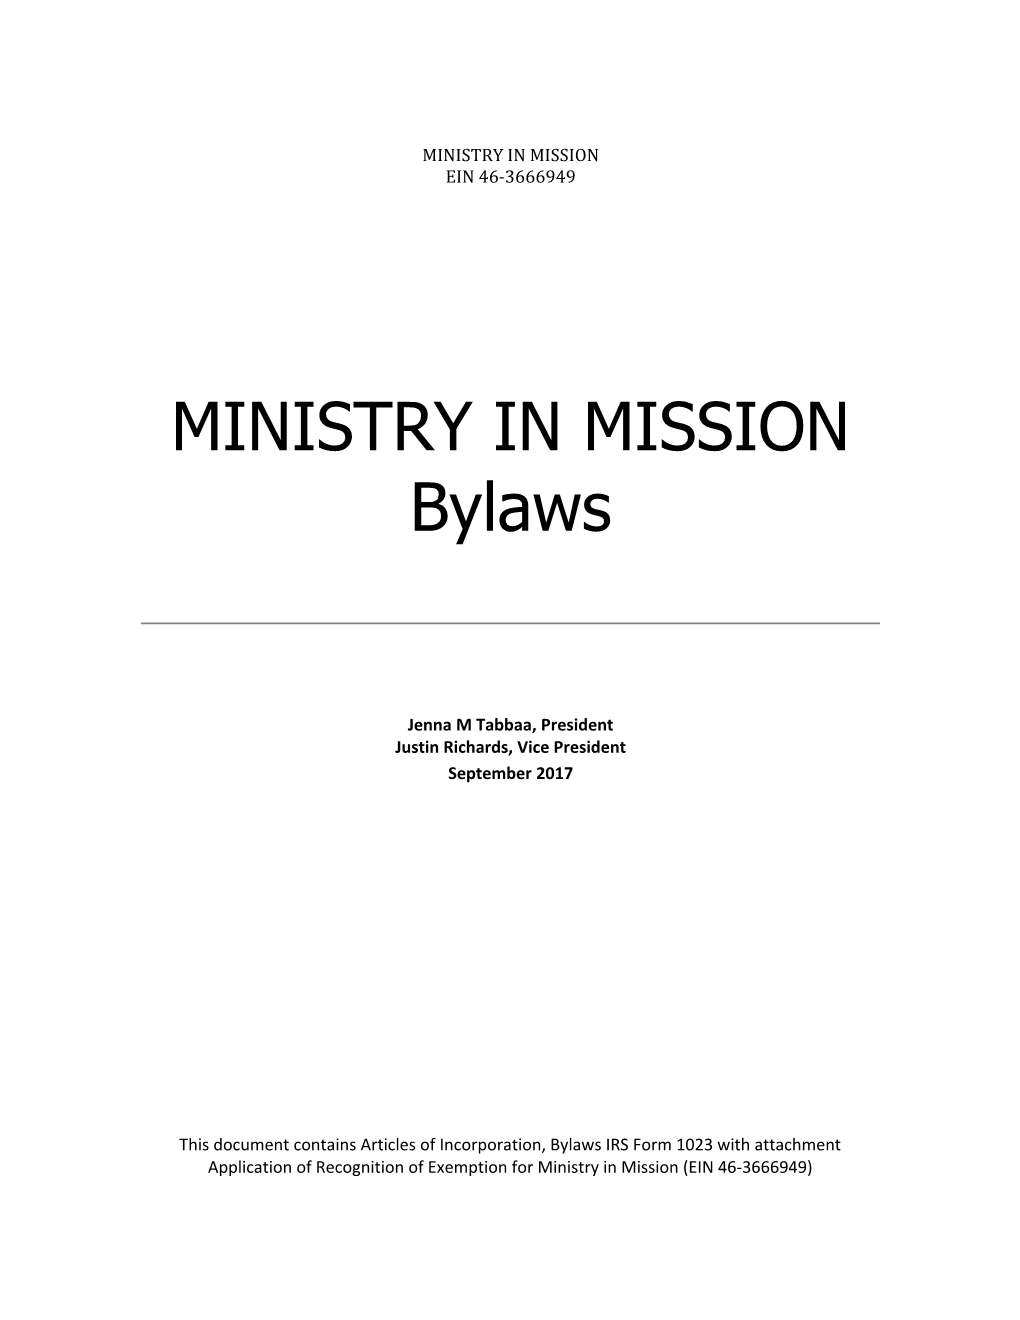 Ministry in Mission Bylaws